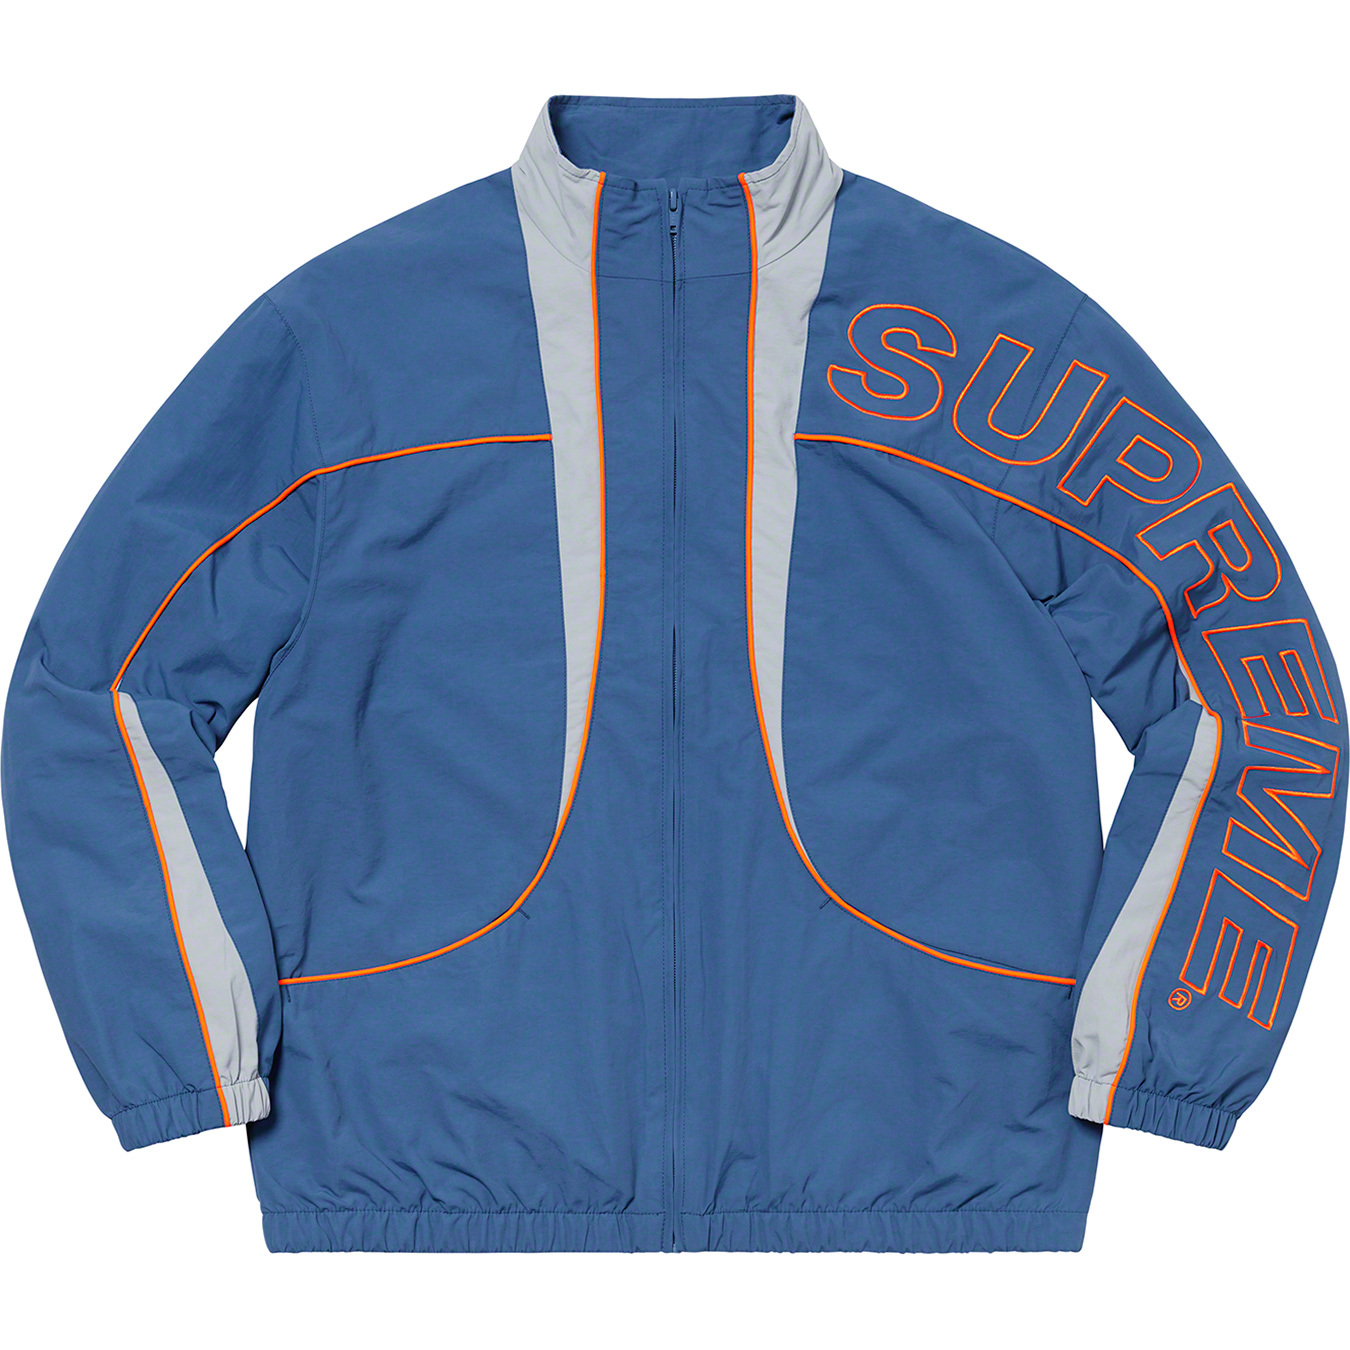 M>Supreme piping track jacket | myglobaltax.com